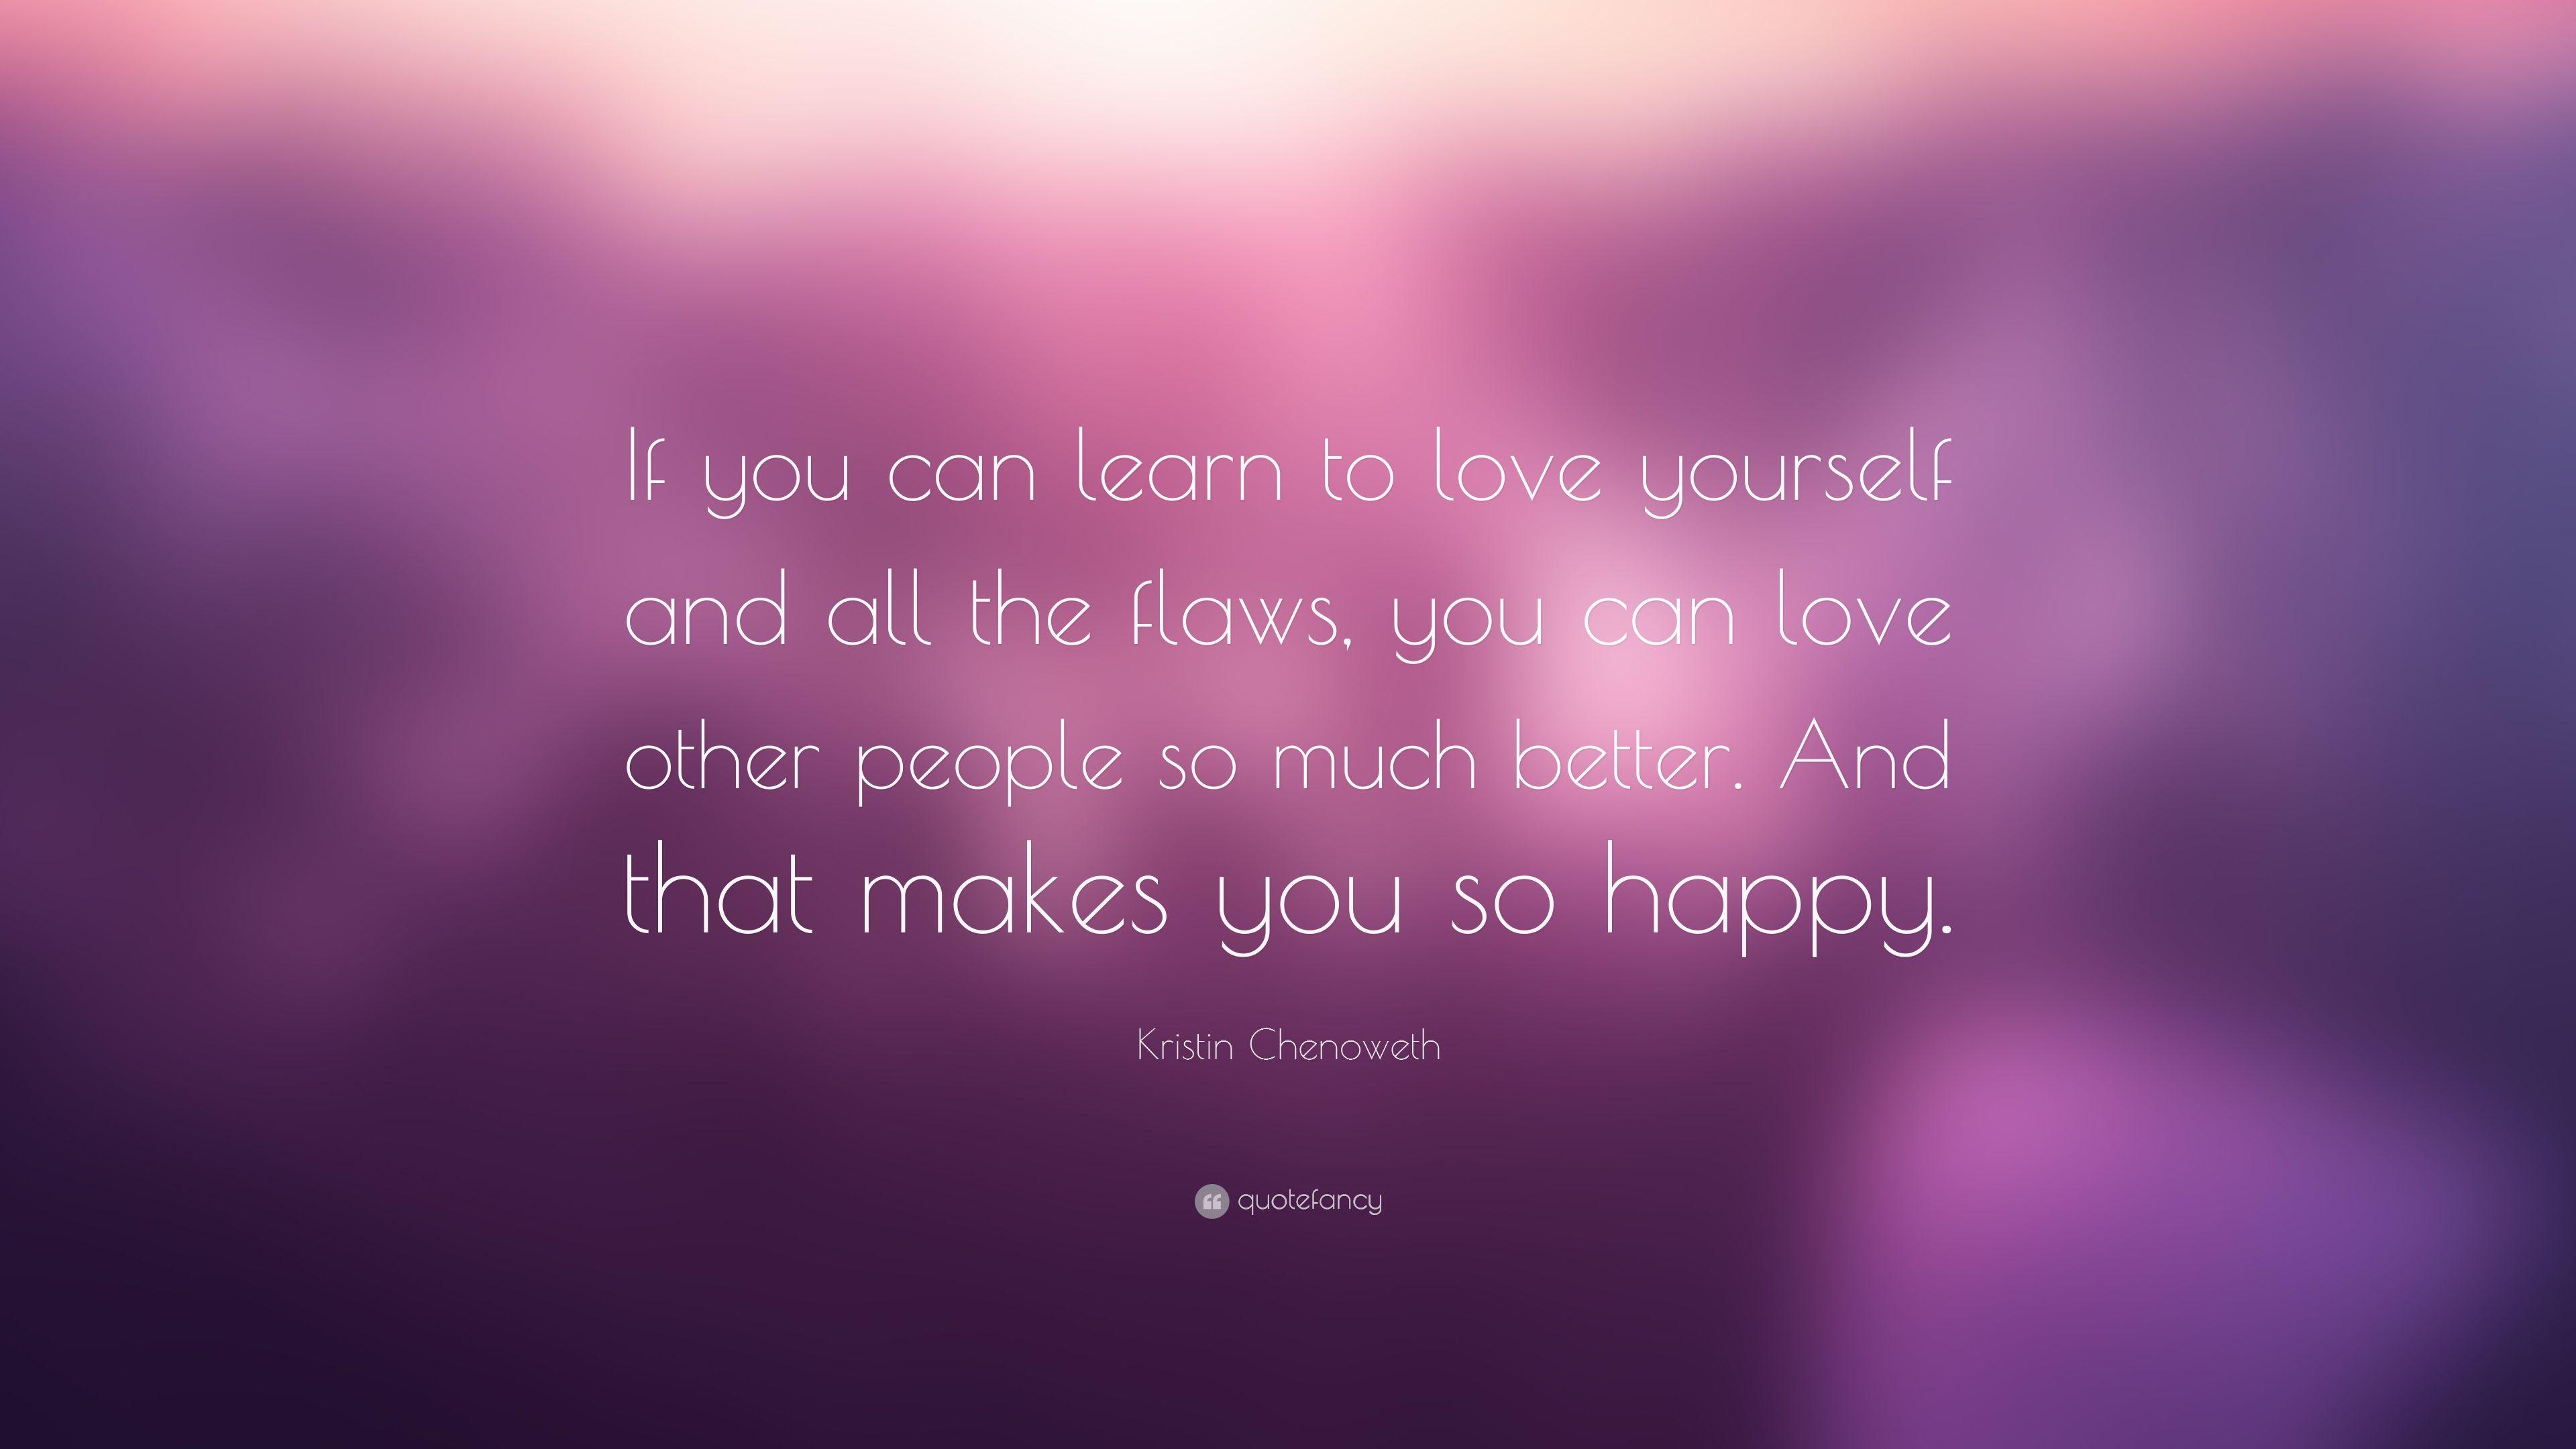 Kristin Chenoweth Quote: “If you can learn to love yourself and all